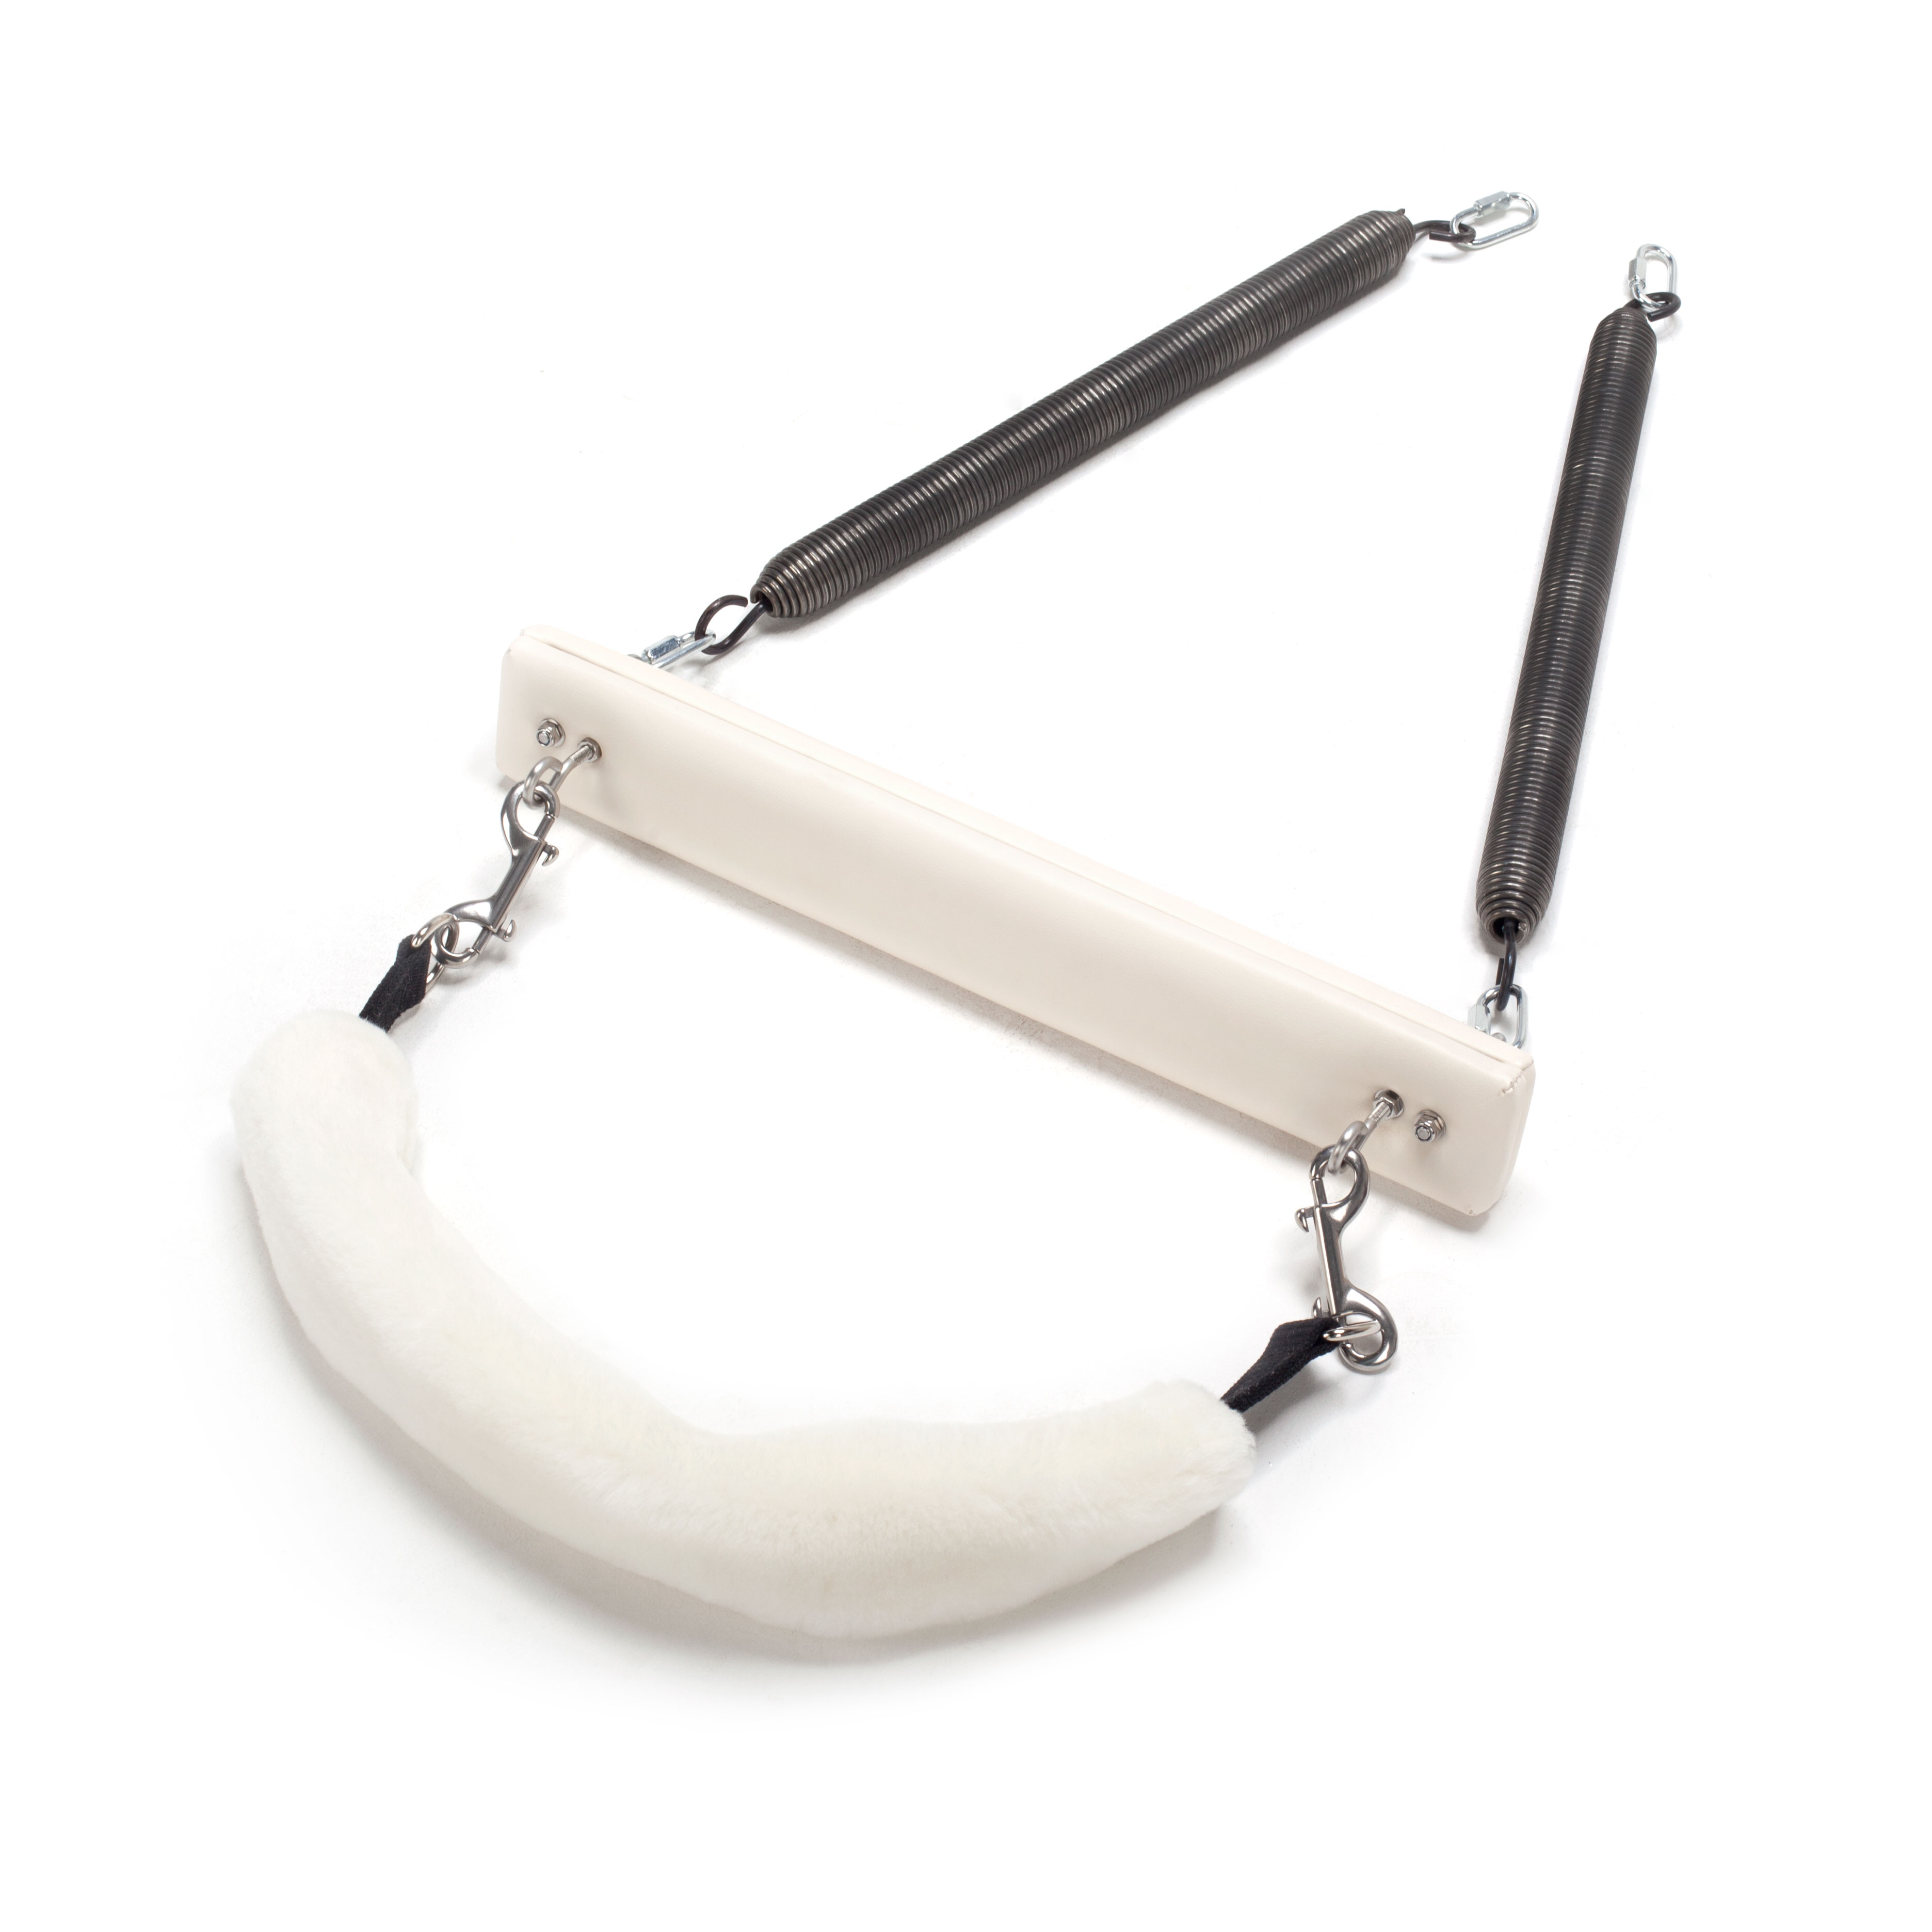 Trapeze Bar Sheep Skin With Spring &amp; 27&quot; Foot Strap (SET)